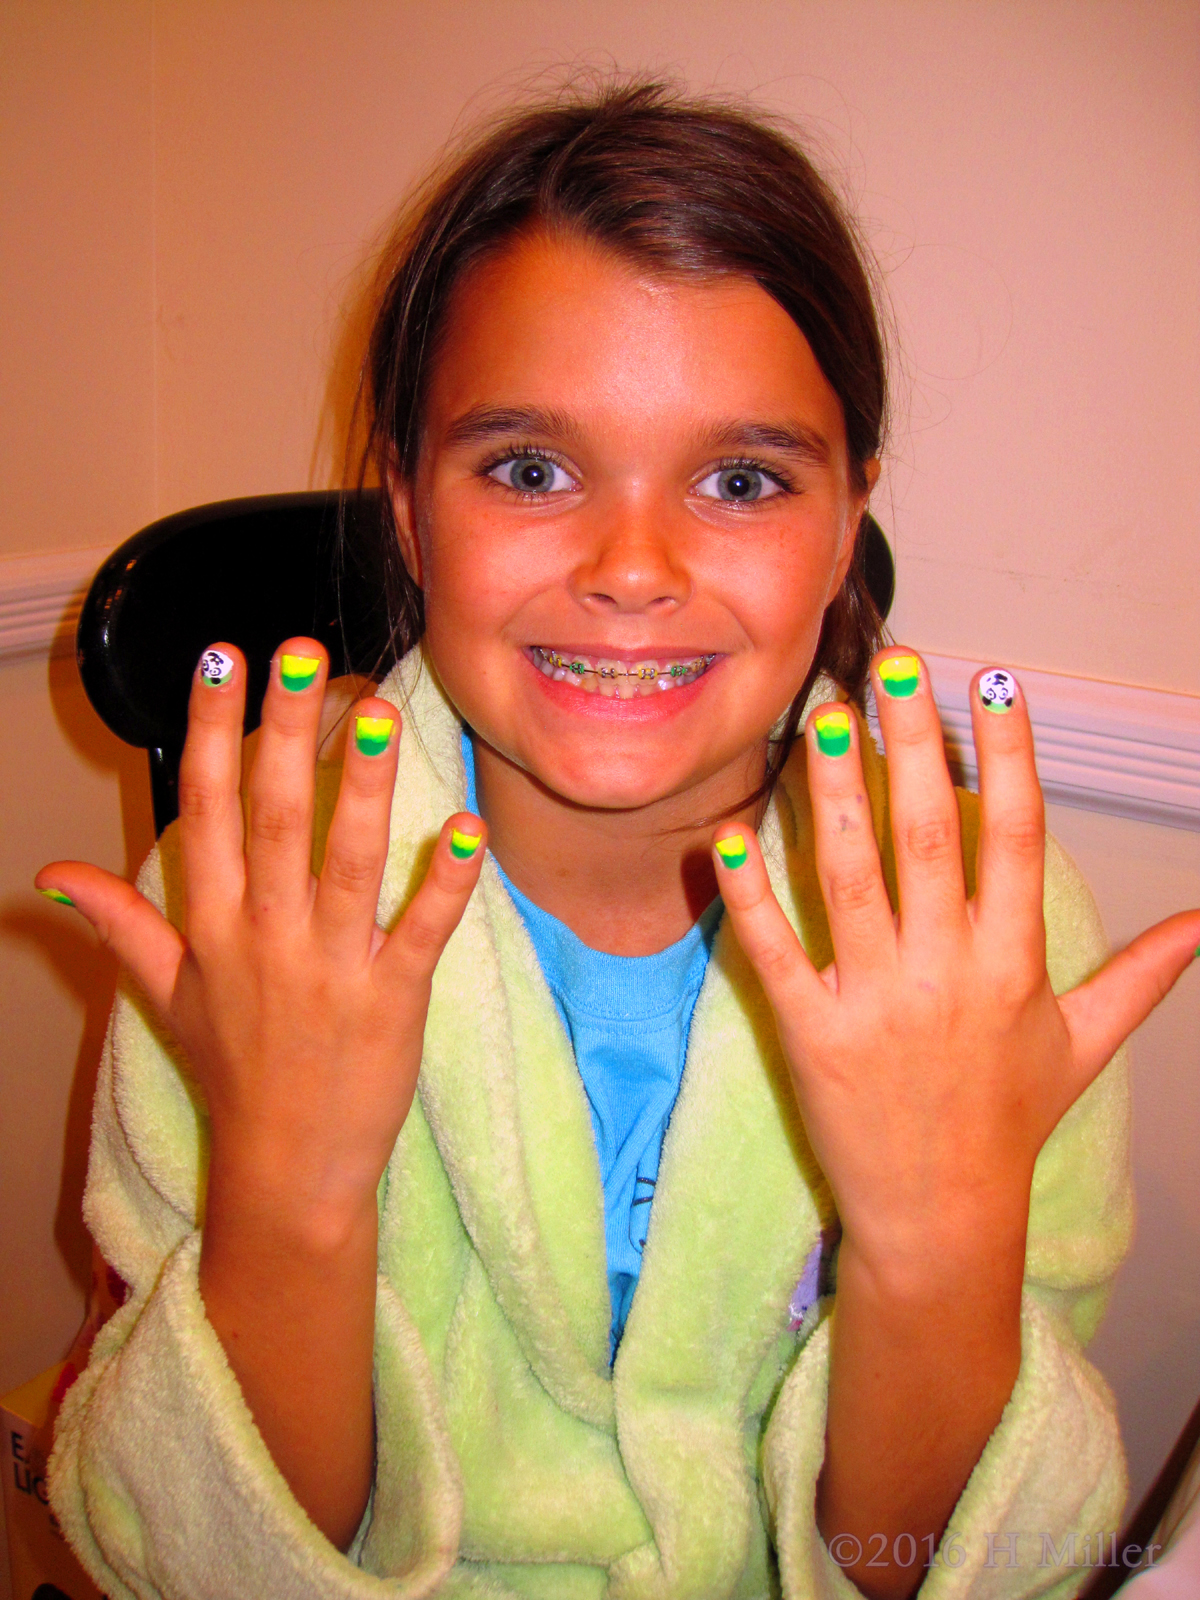 Smiling With Her Awesome New Girls Manicure! 